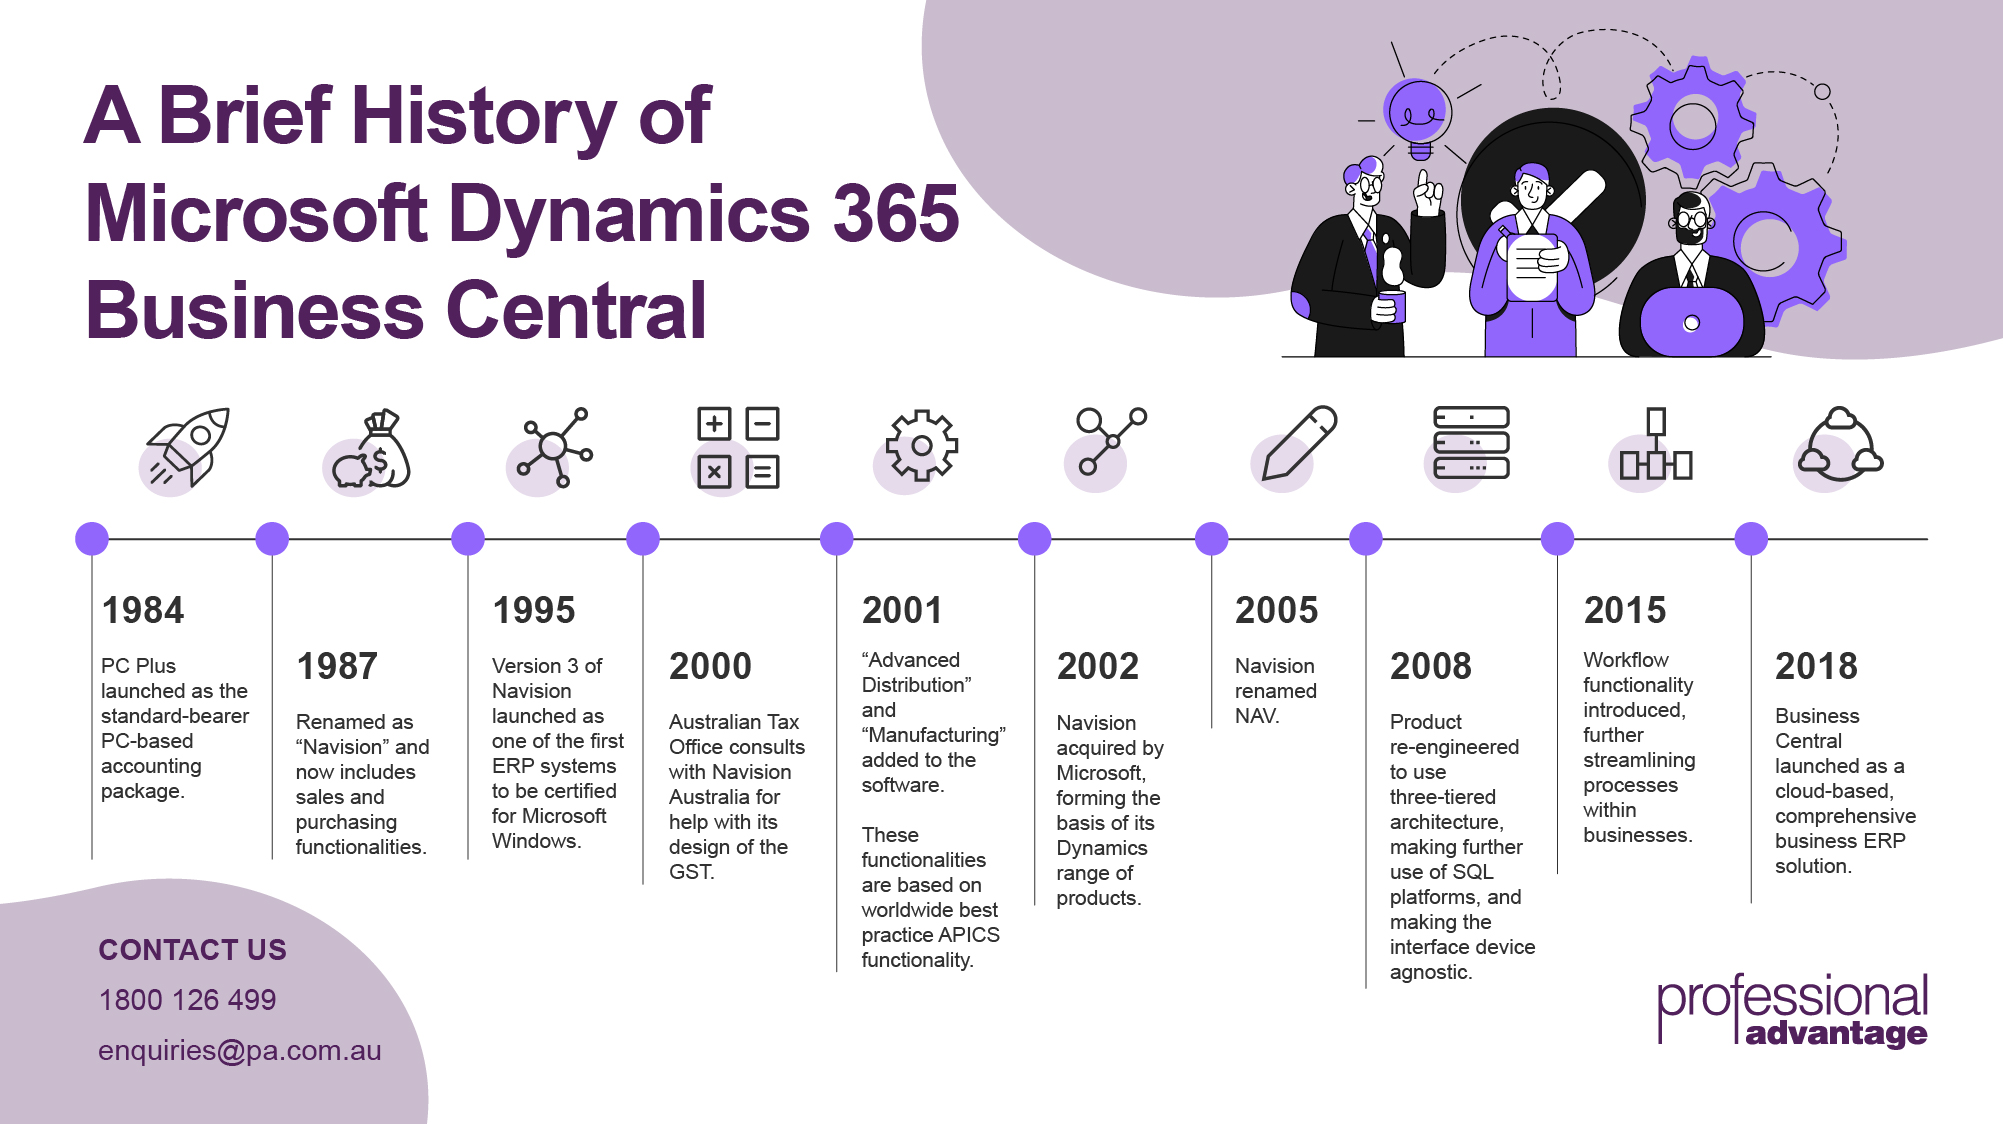 How to Party with the Right 3rd Party Dynamics GP Solution (Infographic)